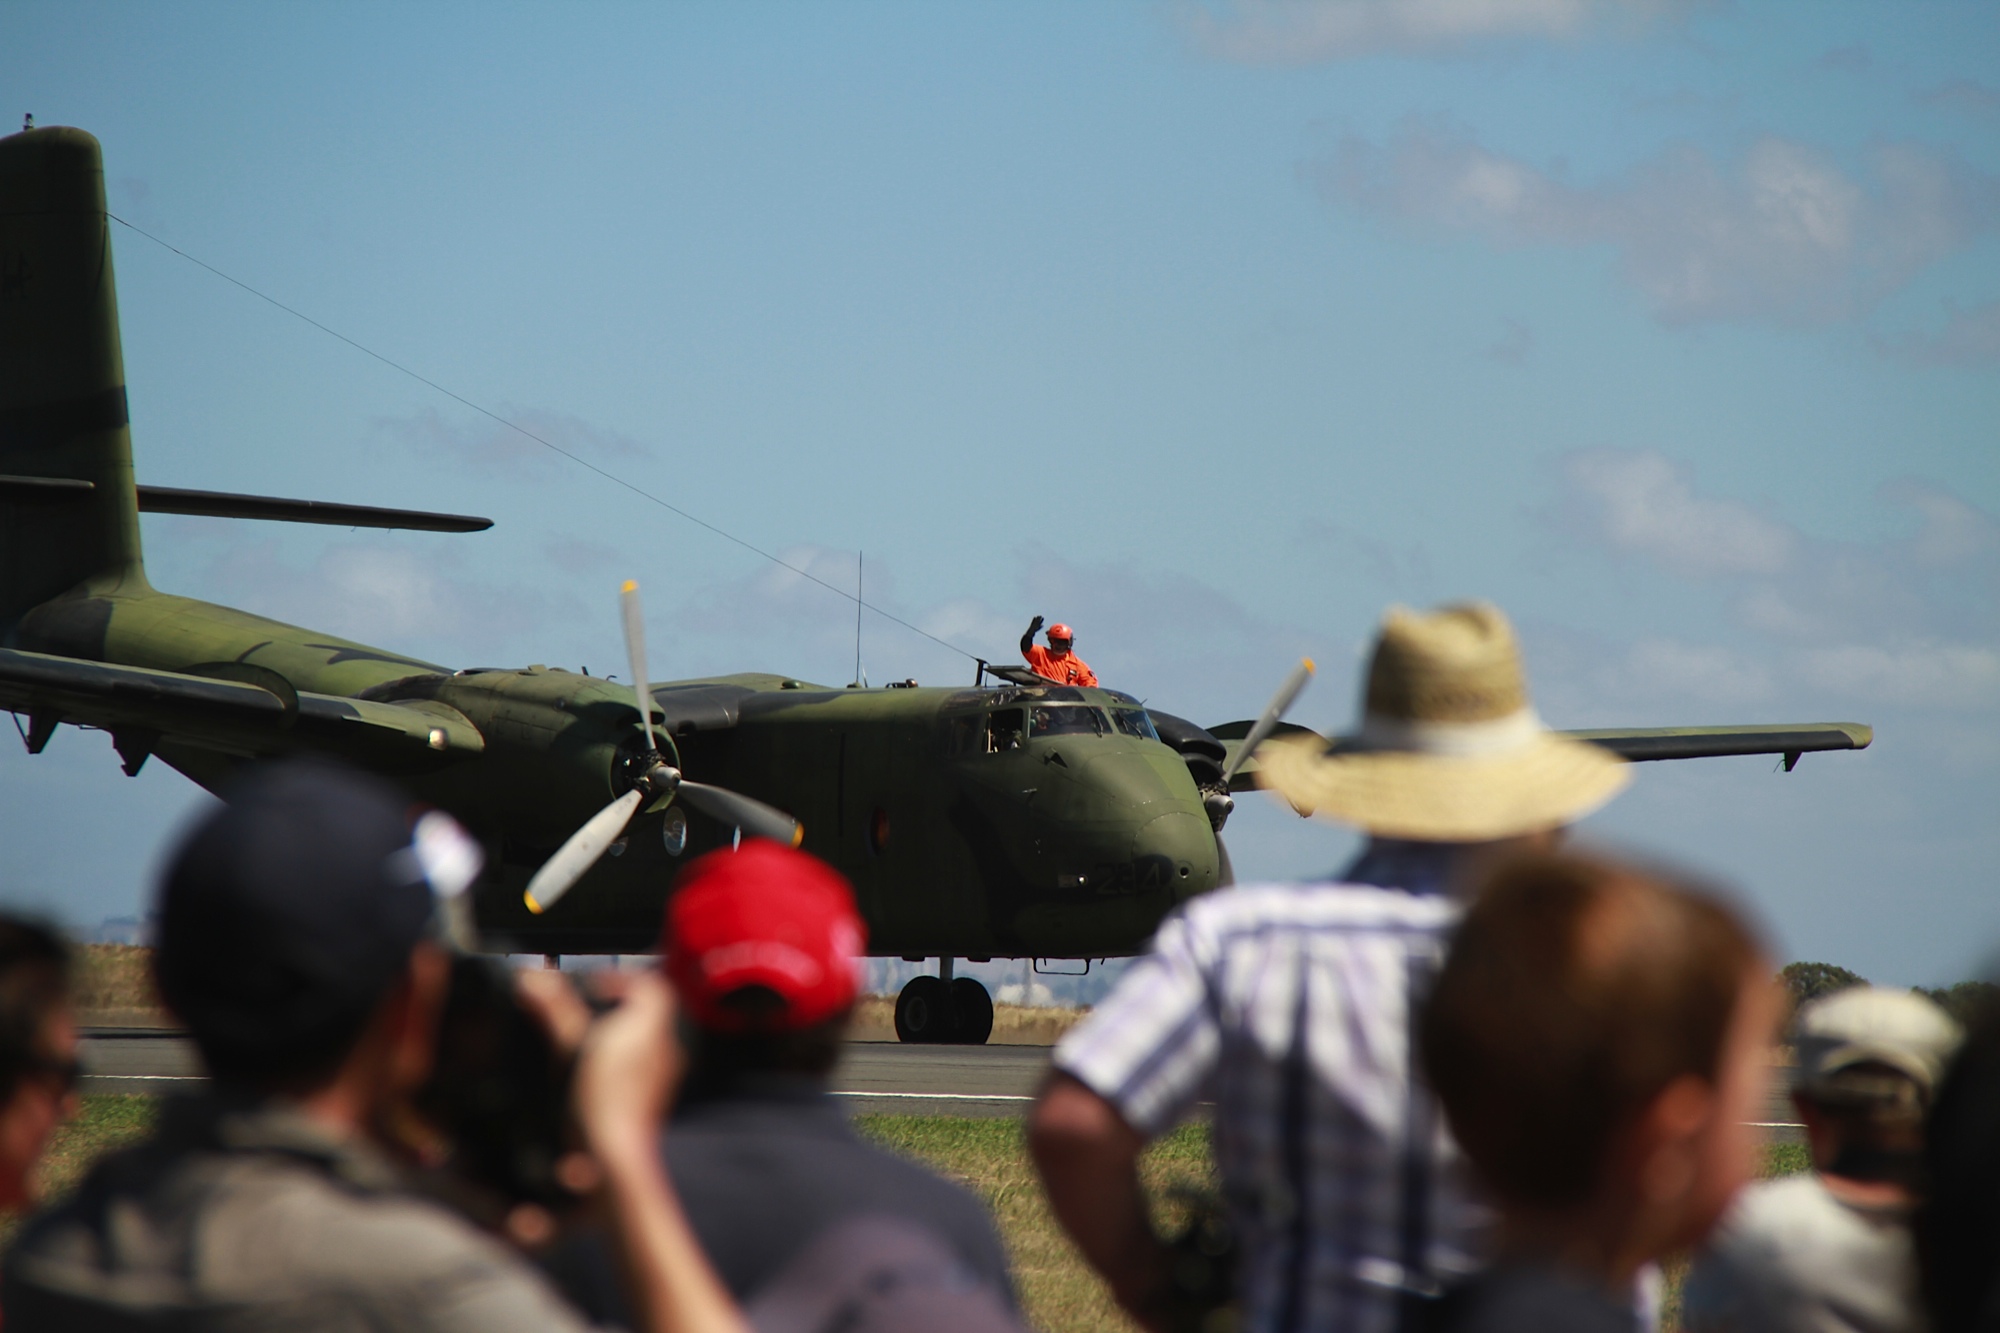 A4-234 wowing crowds at Avalon 2013